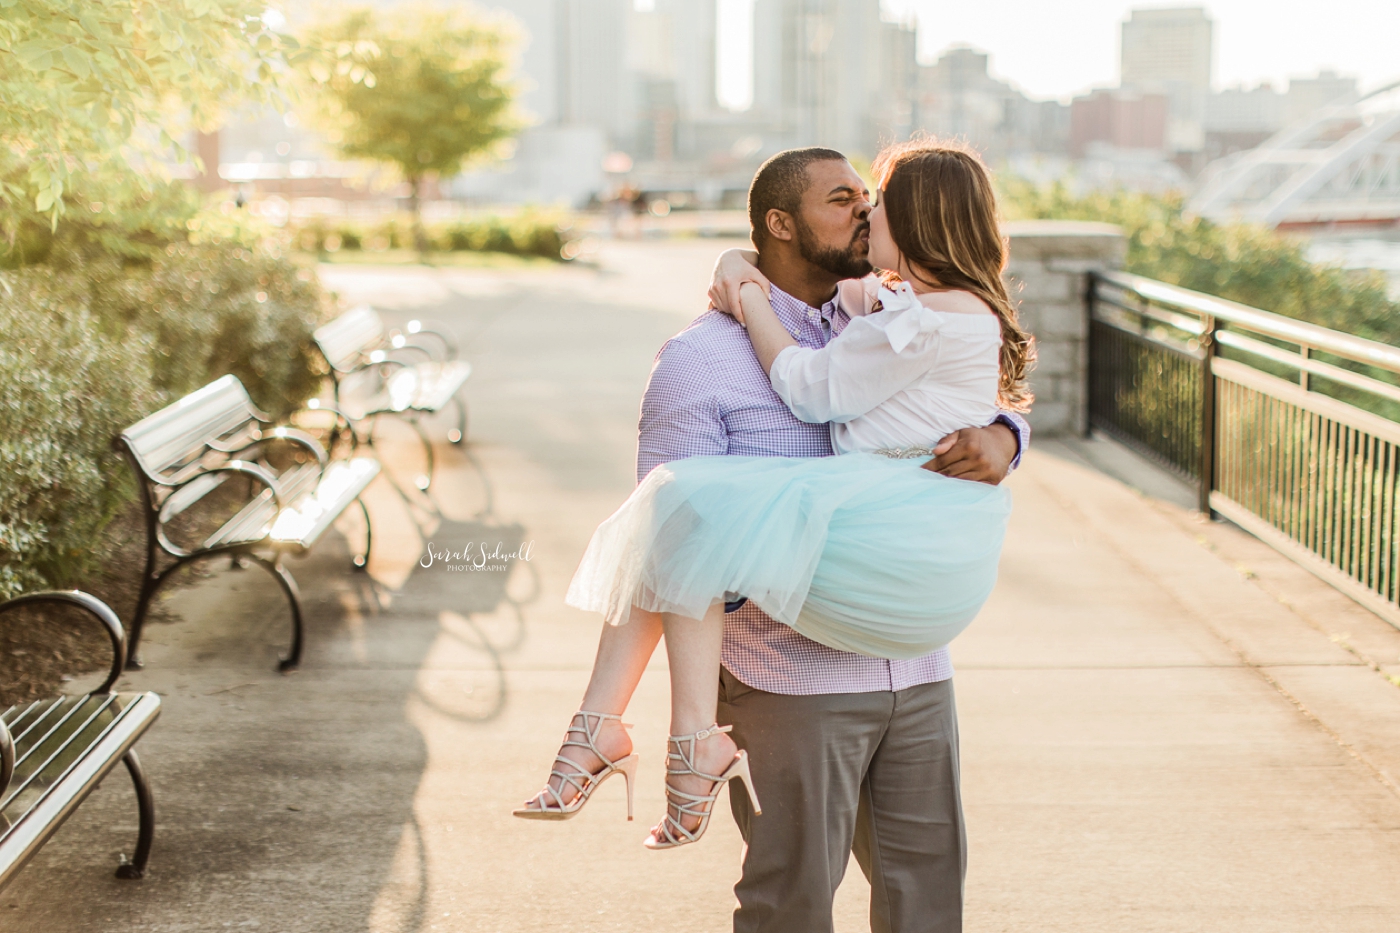 Engagement Photography | Sarah Sidwell Photography